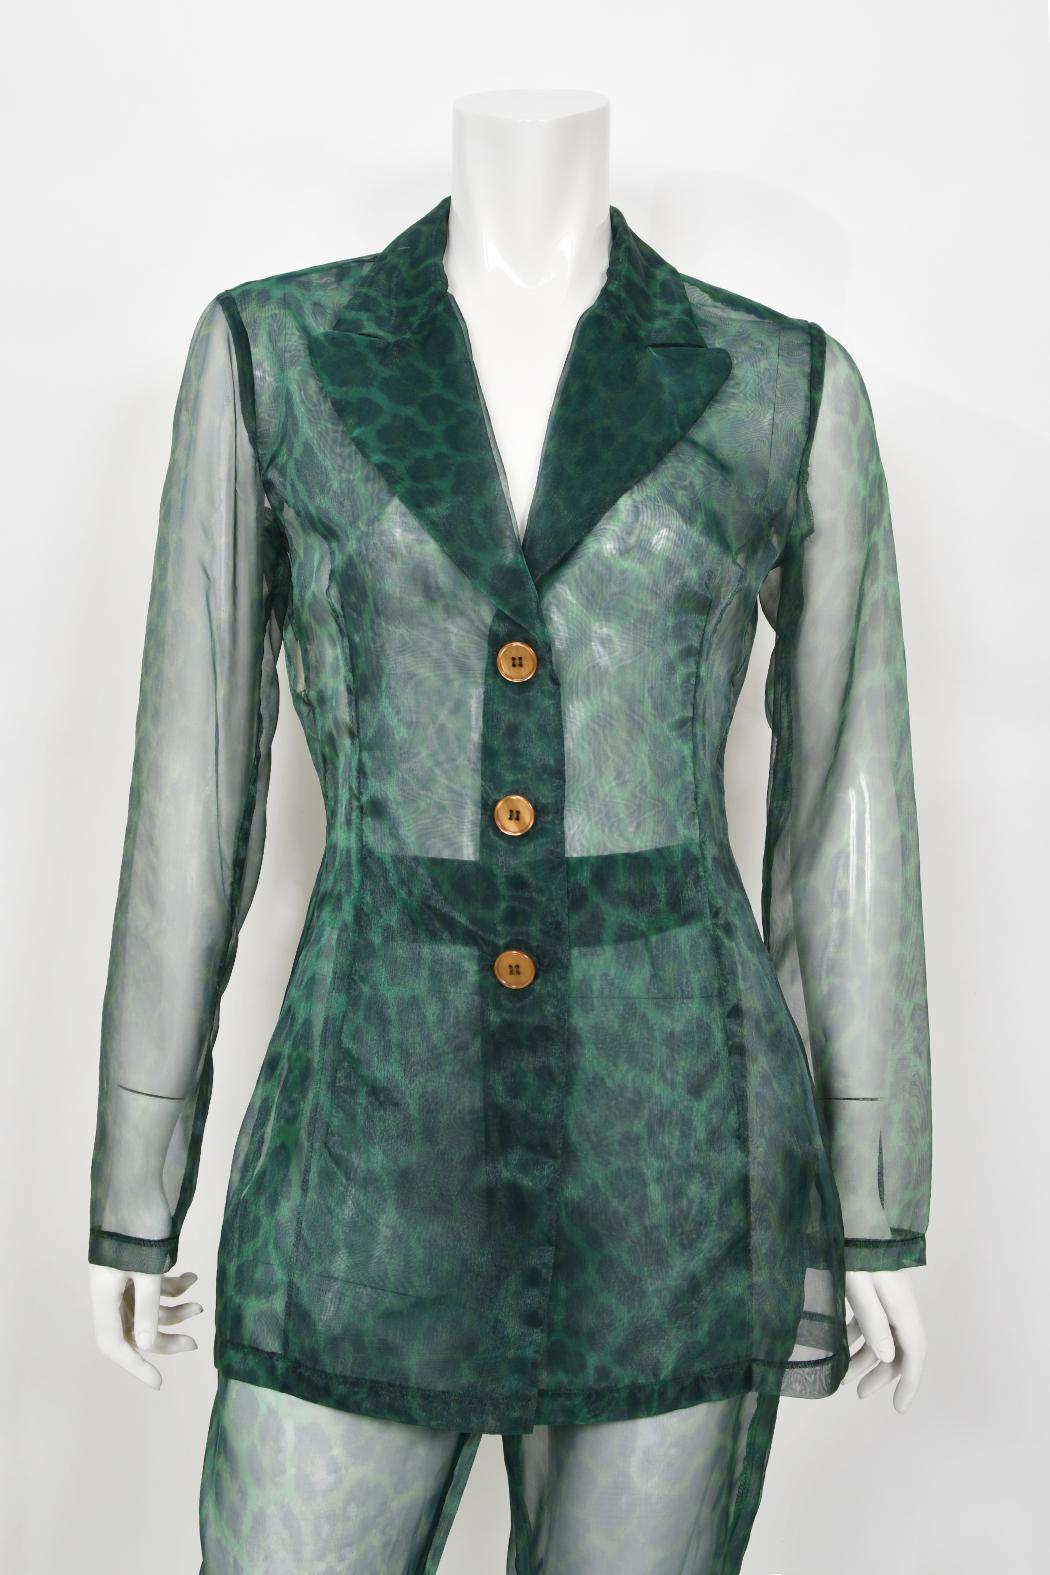 An ultra rare and incredible gorgeous Rifat Ozbek sheer green leopard print pantsuit dating back to his 1995 spring-summer collection. Rifat Ozbek is a Turkish fashion designer who entered the Liverpool School of Architecture; graduated in 1972. On